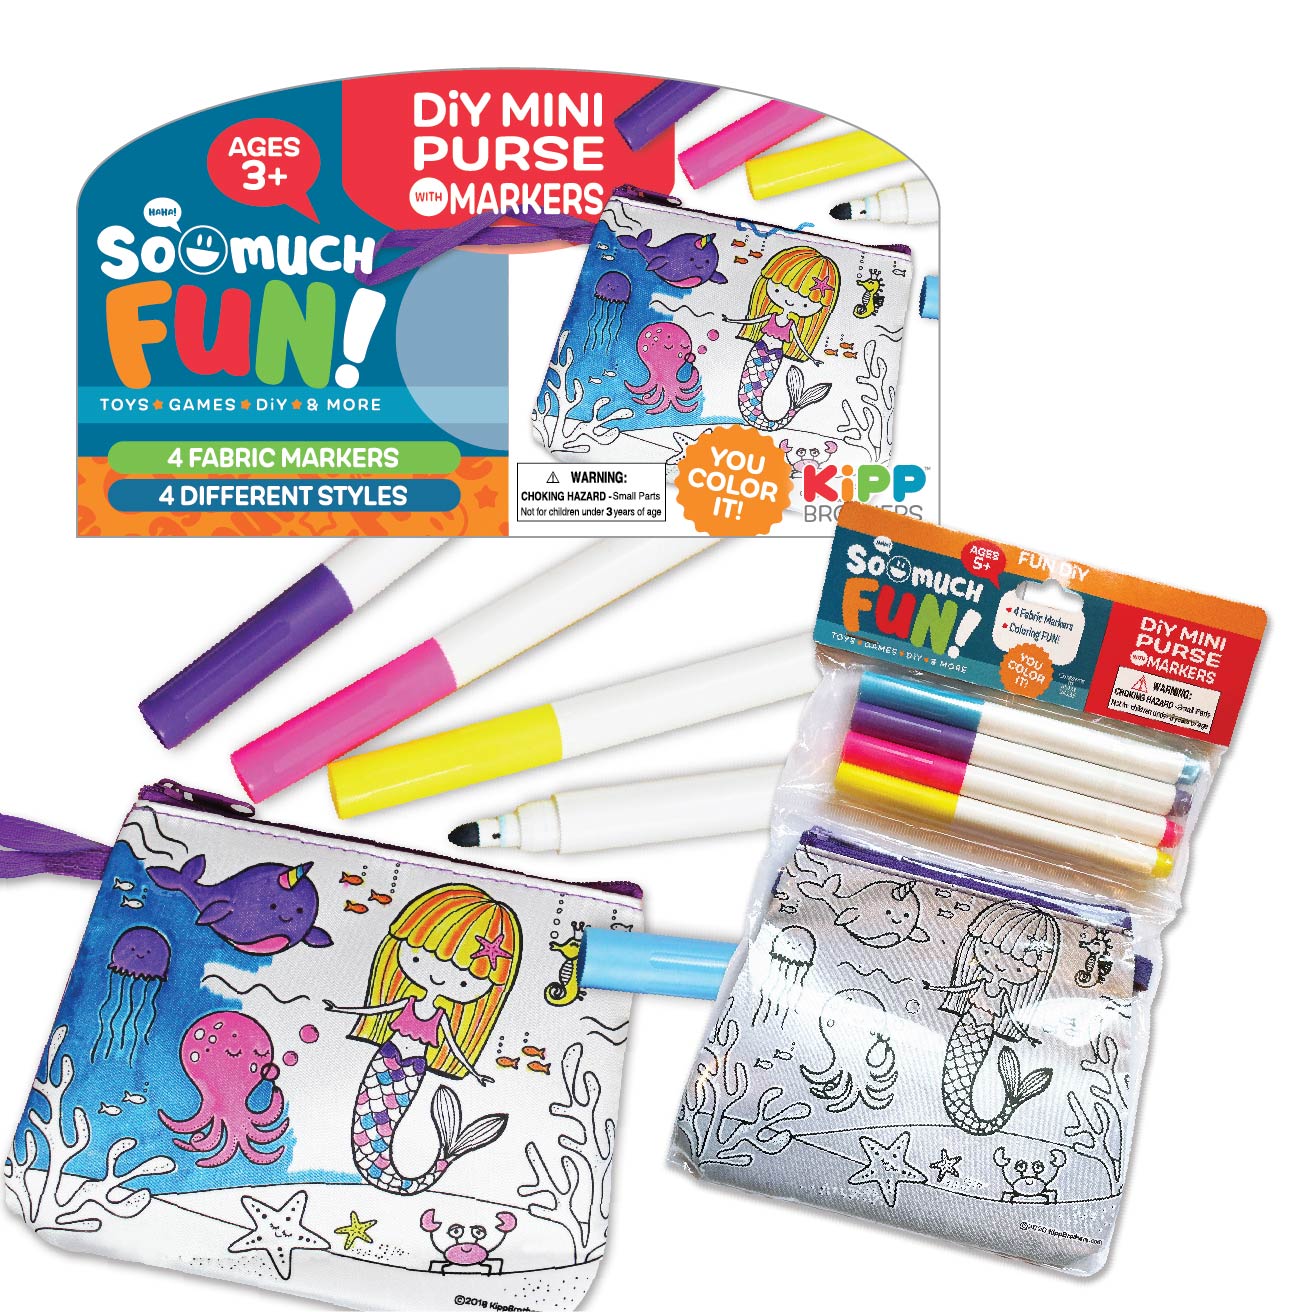 ITEM NUMBER 022942 DIY MINI PURSE WITH FABRIC MARKERS 12 PIECES PER PACK